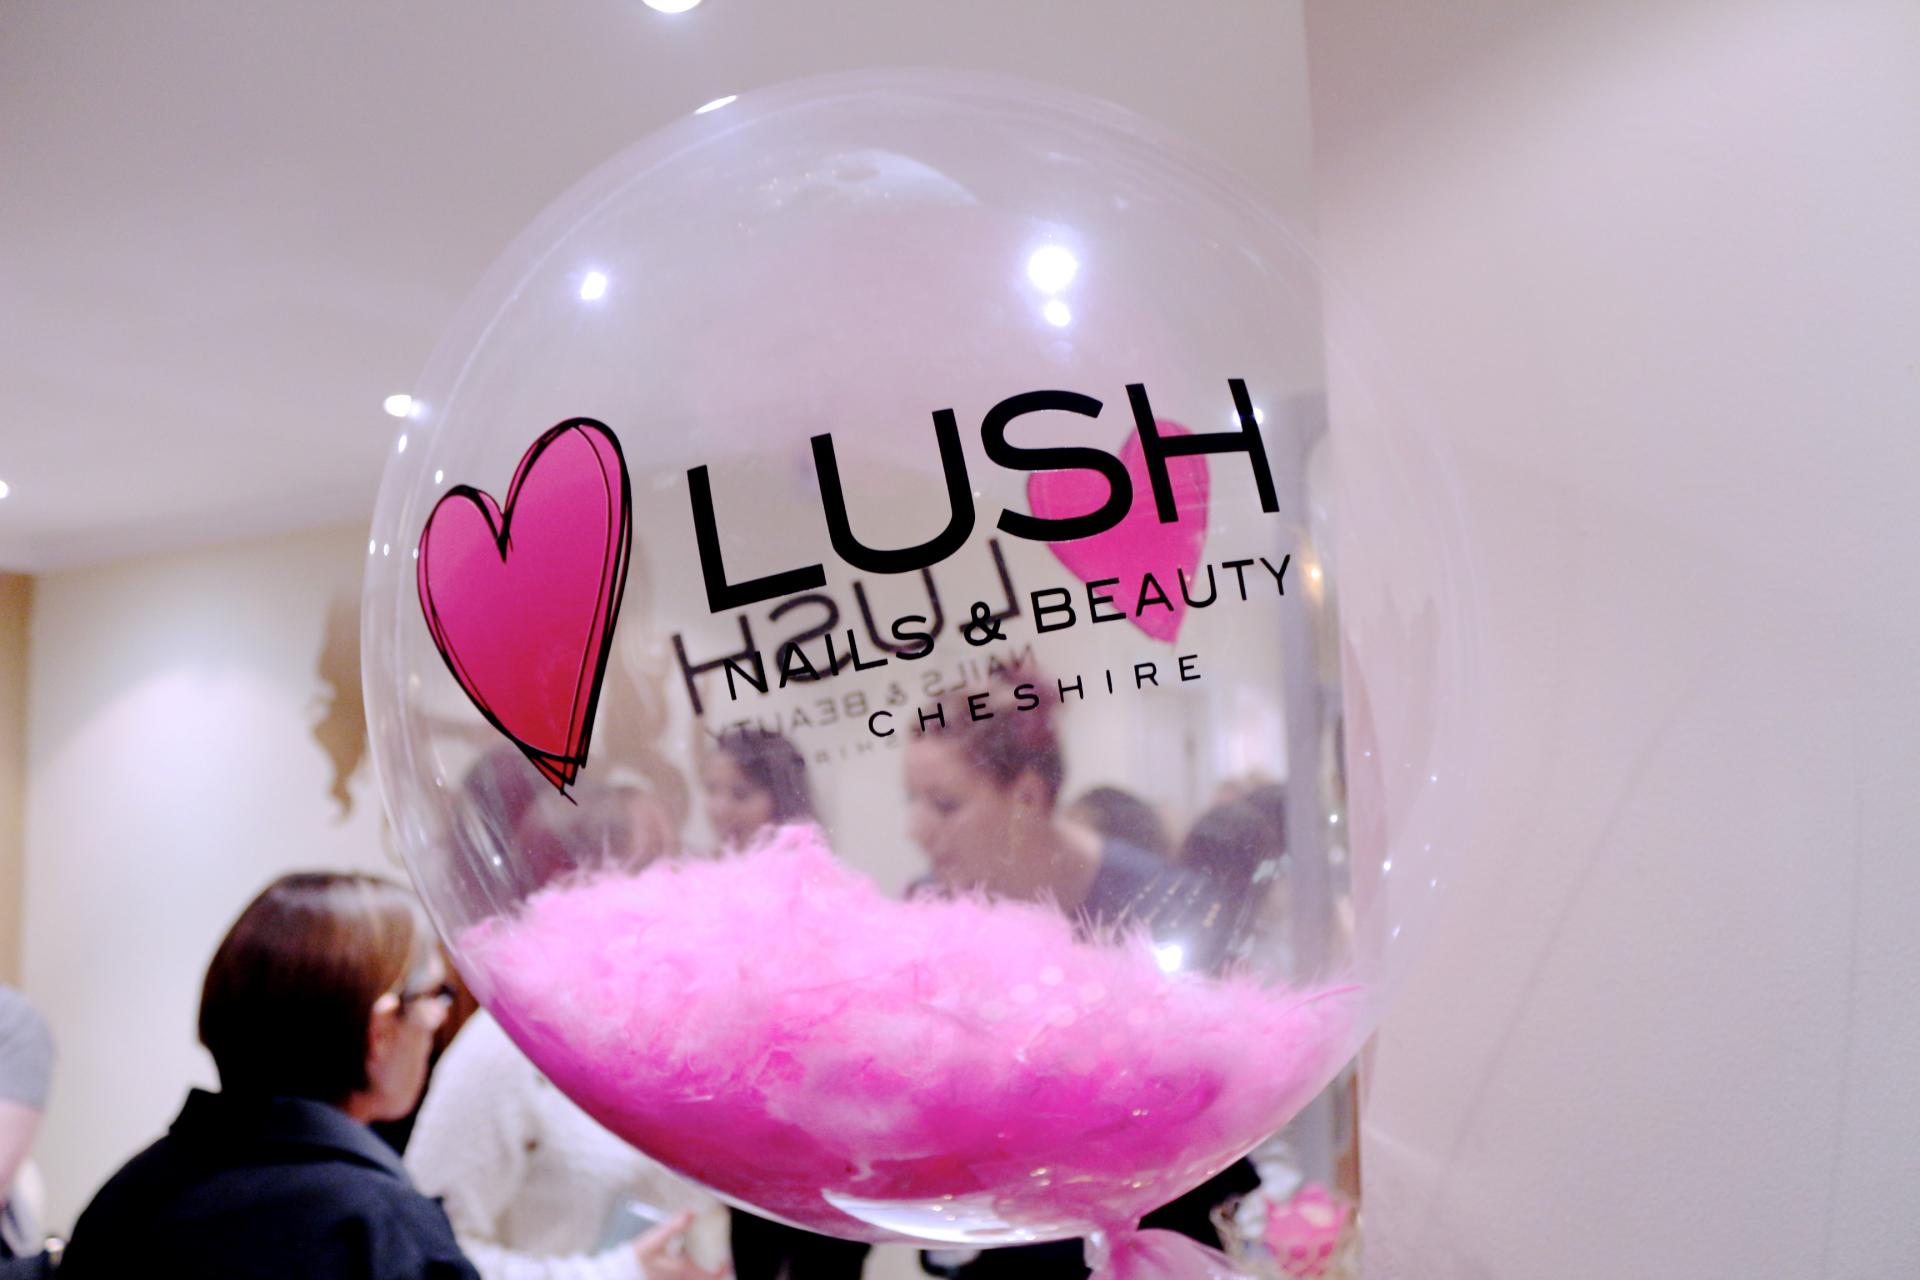 Lush Nails and Beauty Cheshire